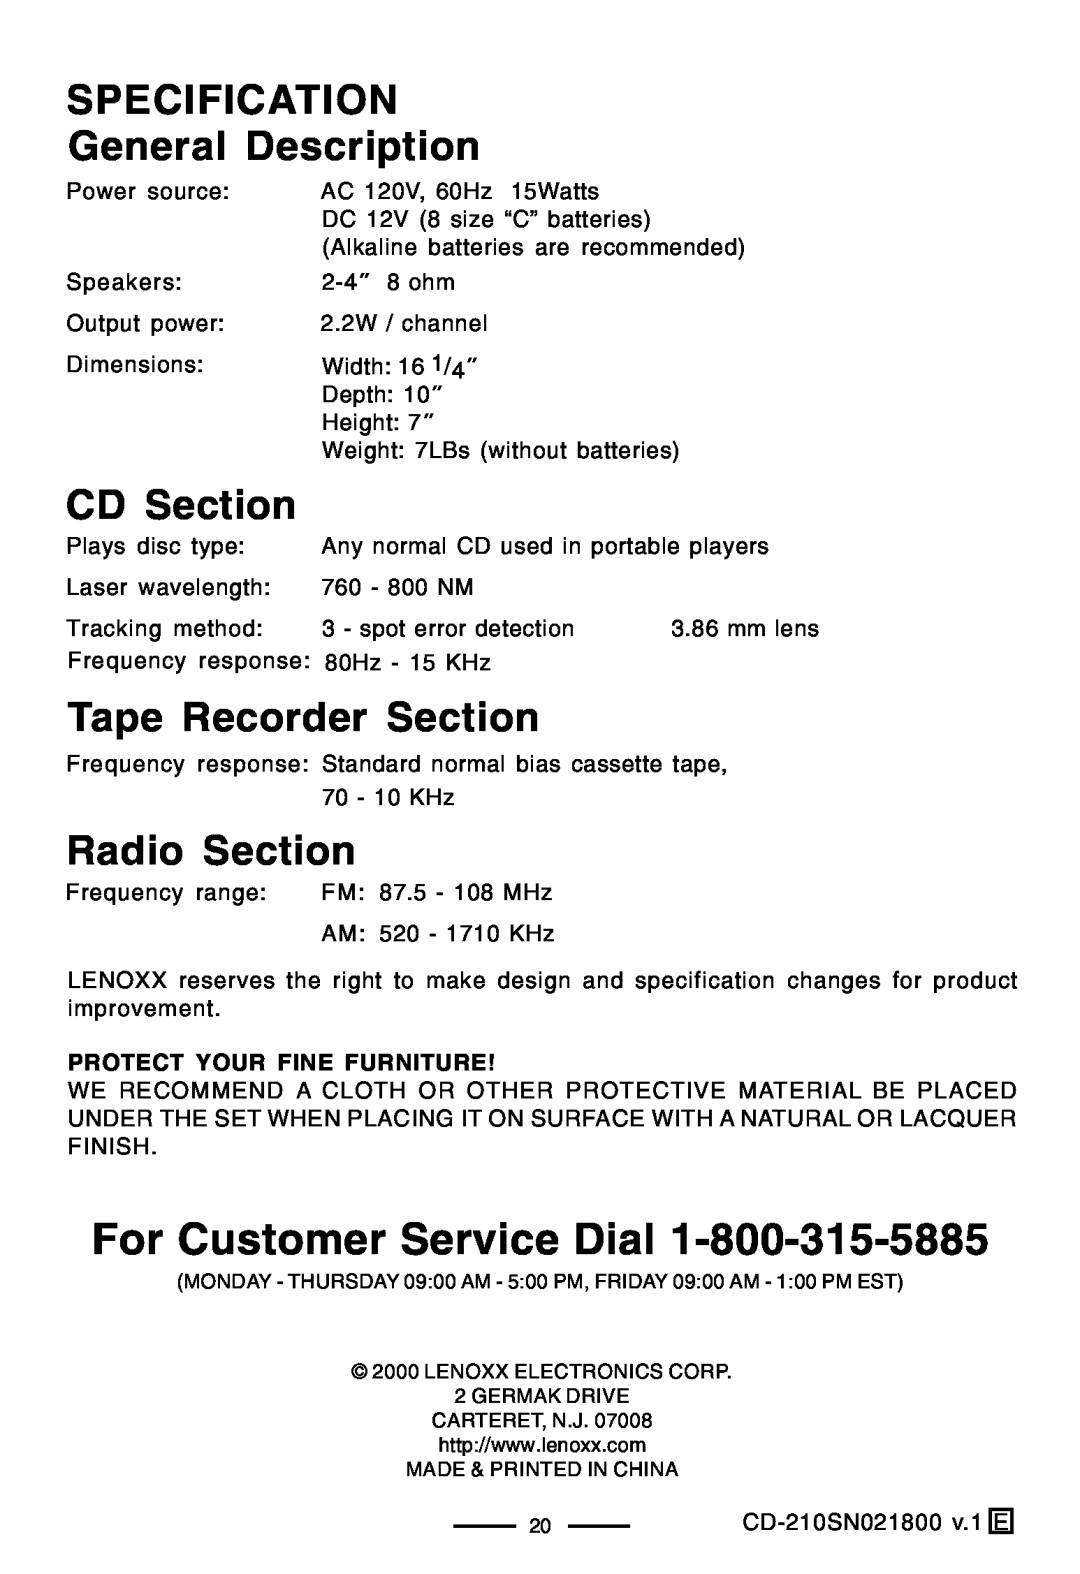 Lenoxx Electronics CD-210 manual SPECIFICATION General Description, CD Section, Tape Recorder Section, Radio Section 